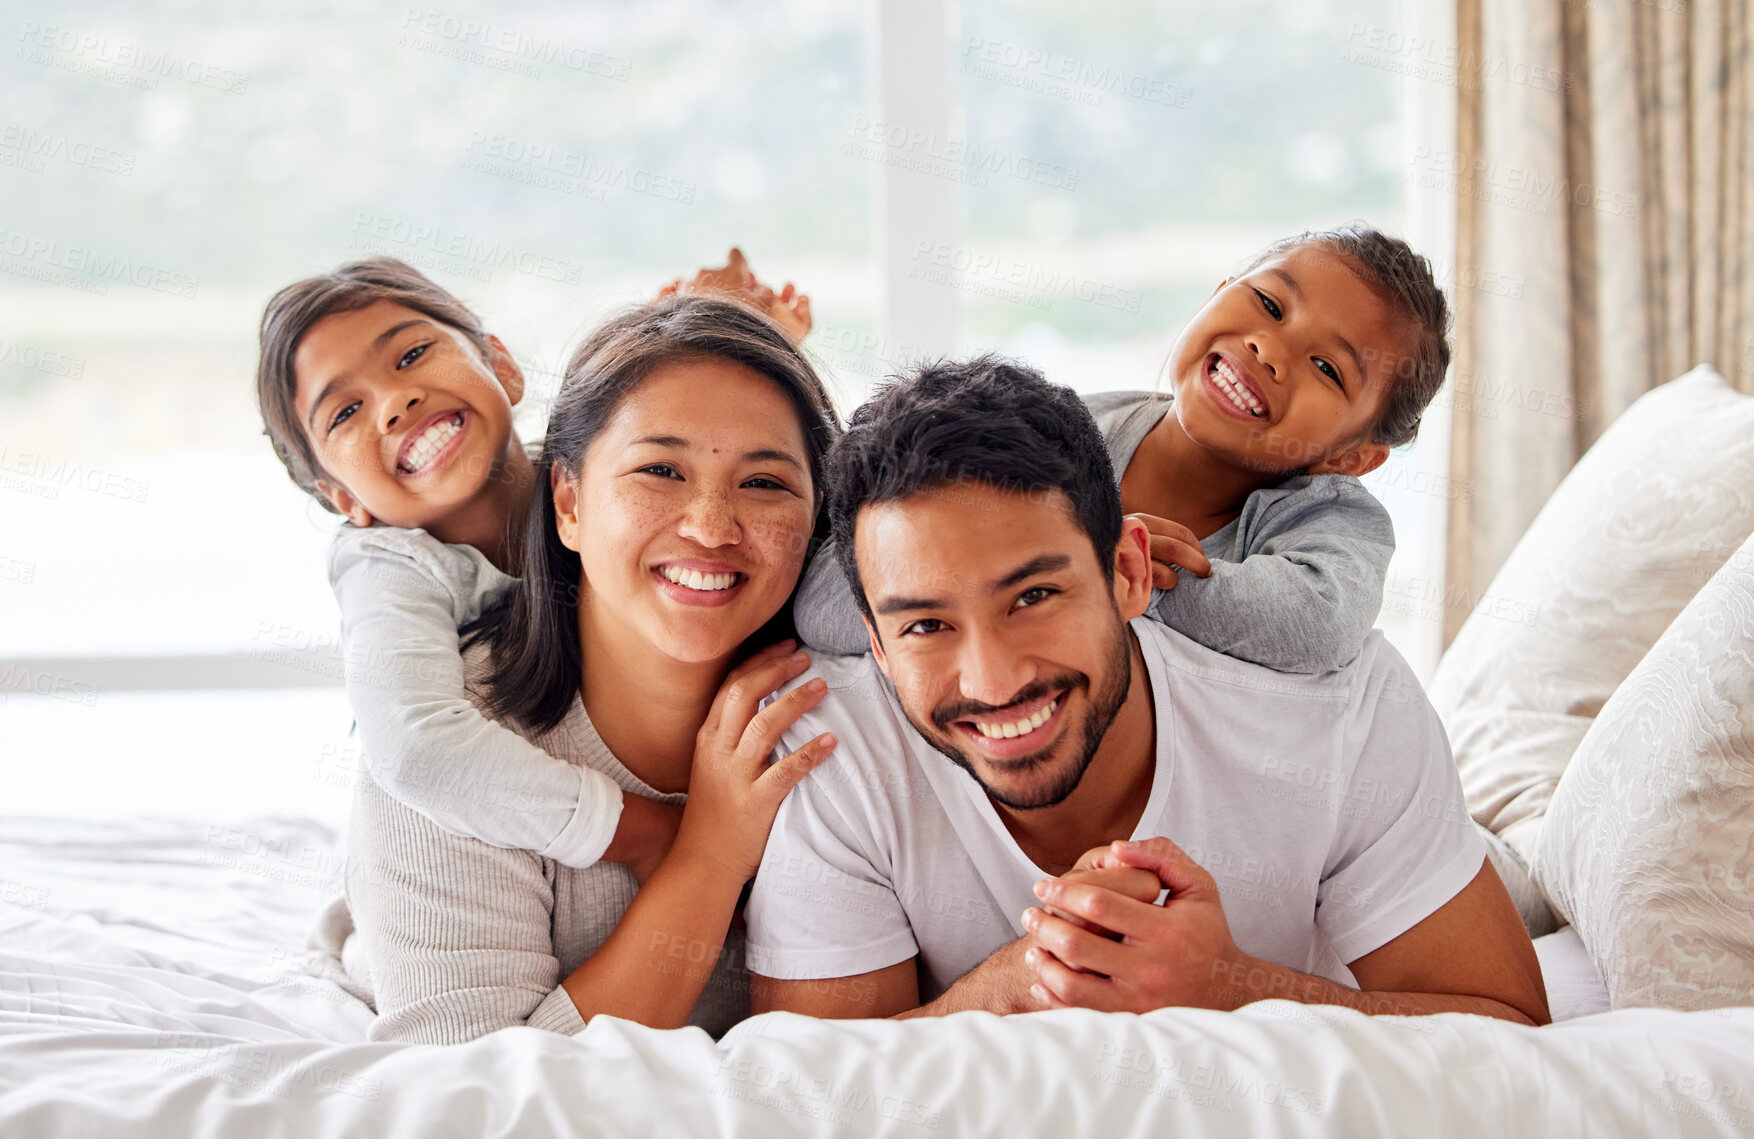 Buy stock photo Young happy smiling couple looking cheerful and relaxed while sharing the bed with their daughters. Two girls being playful while in bed with their parents